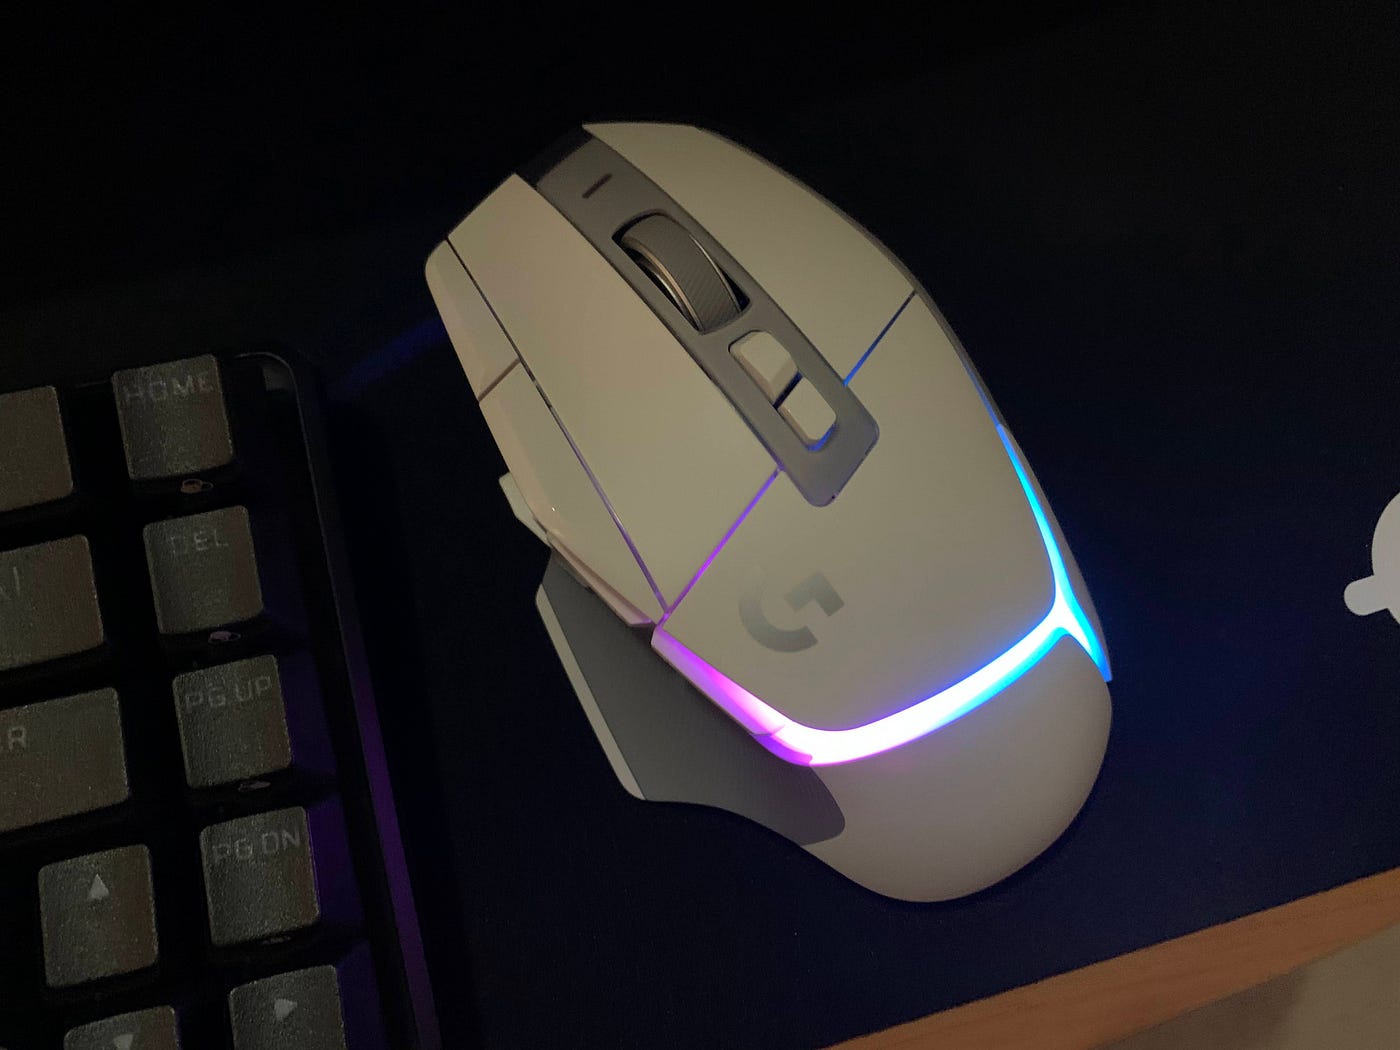 Logitech G502X Plus Wireless Gaming Mouse Review, by Alex Rowe